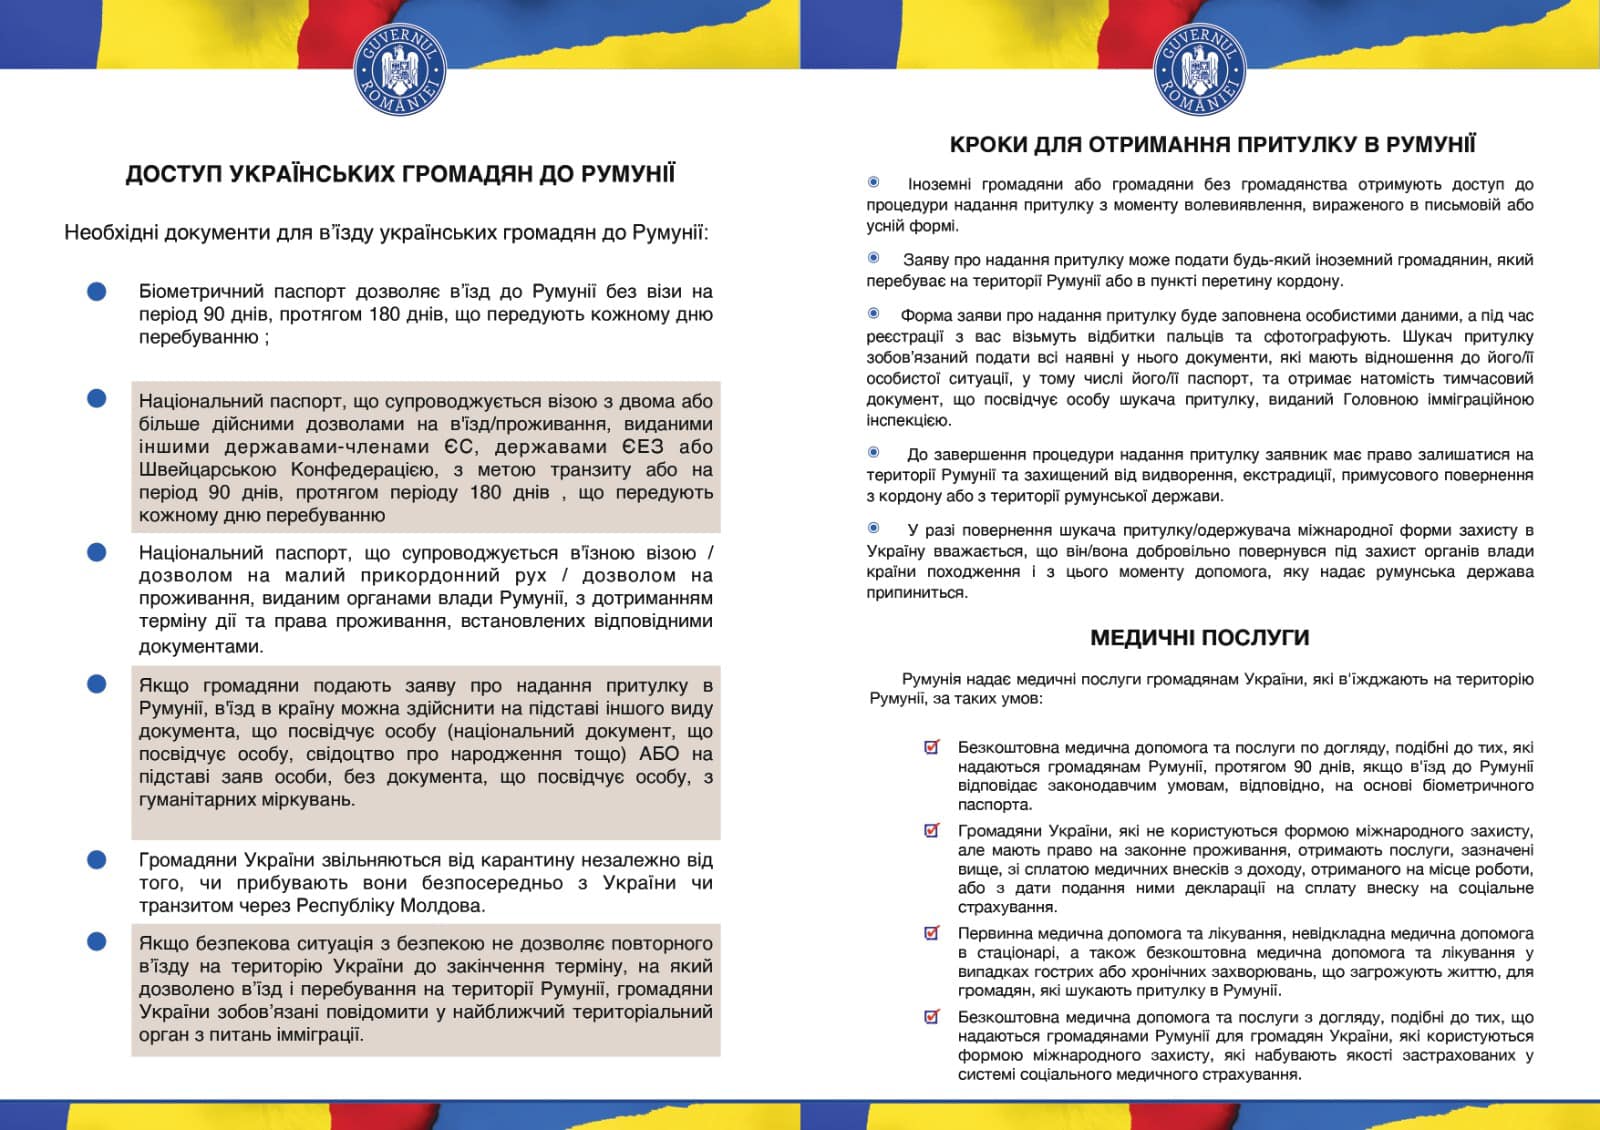 Important information for Ukranians arriving in Romania